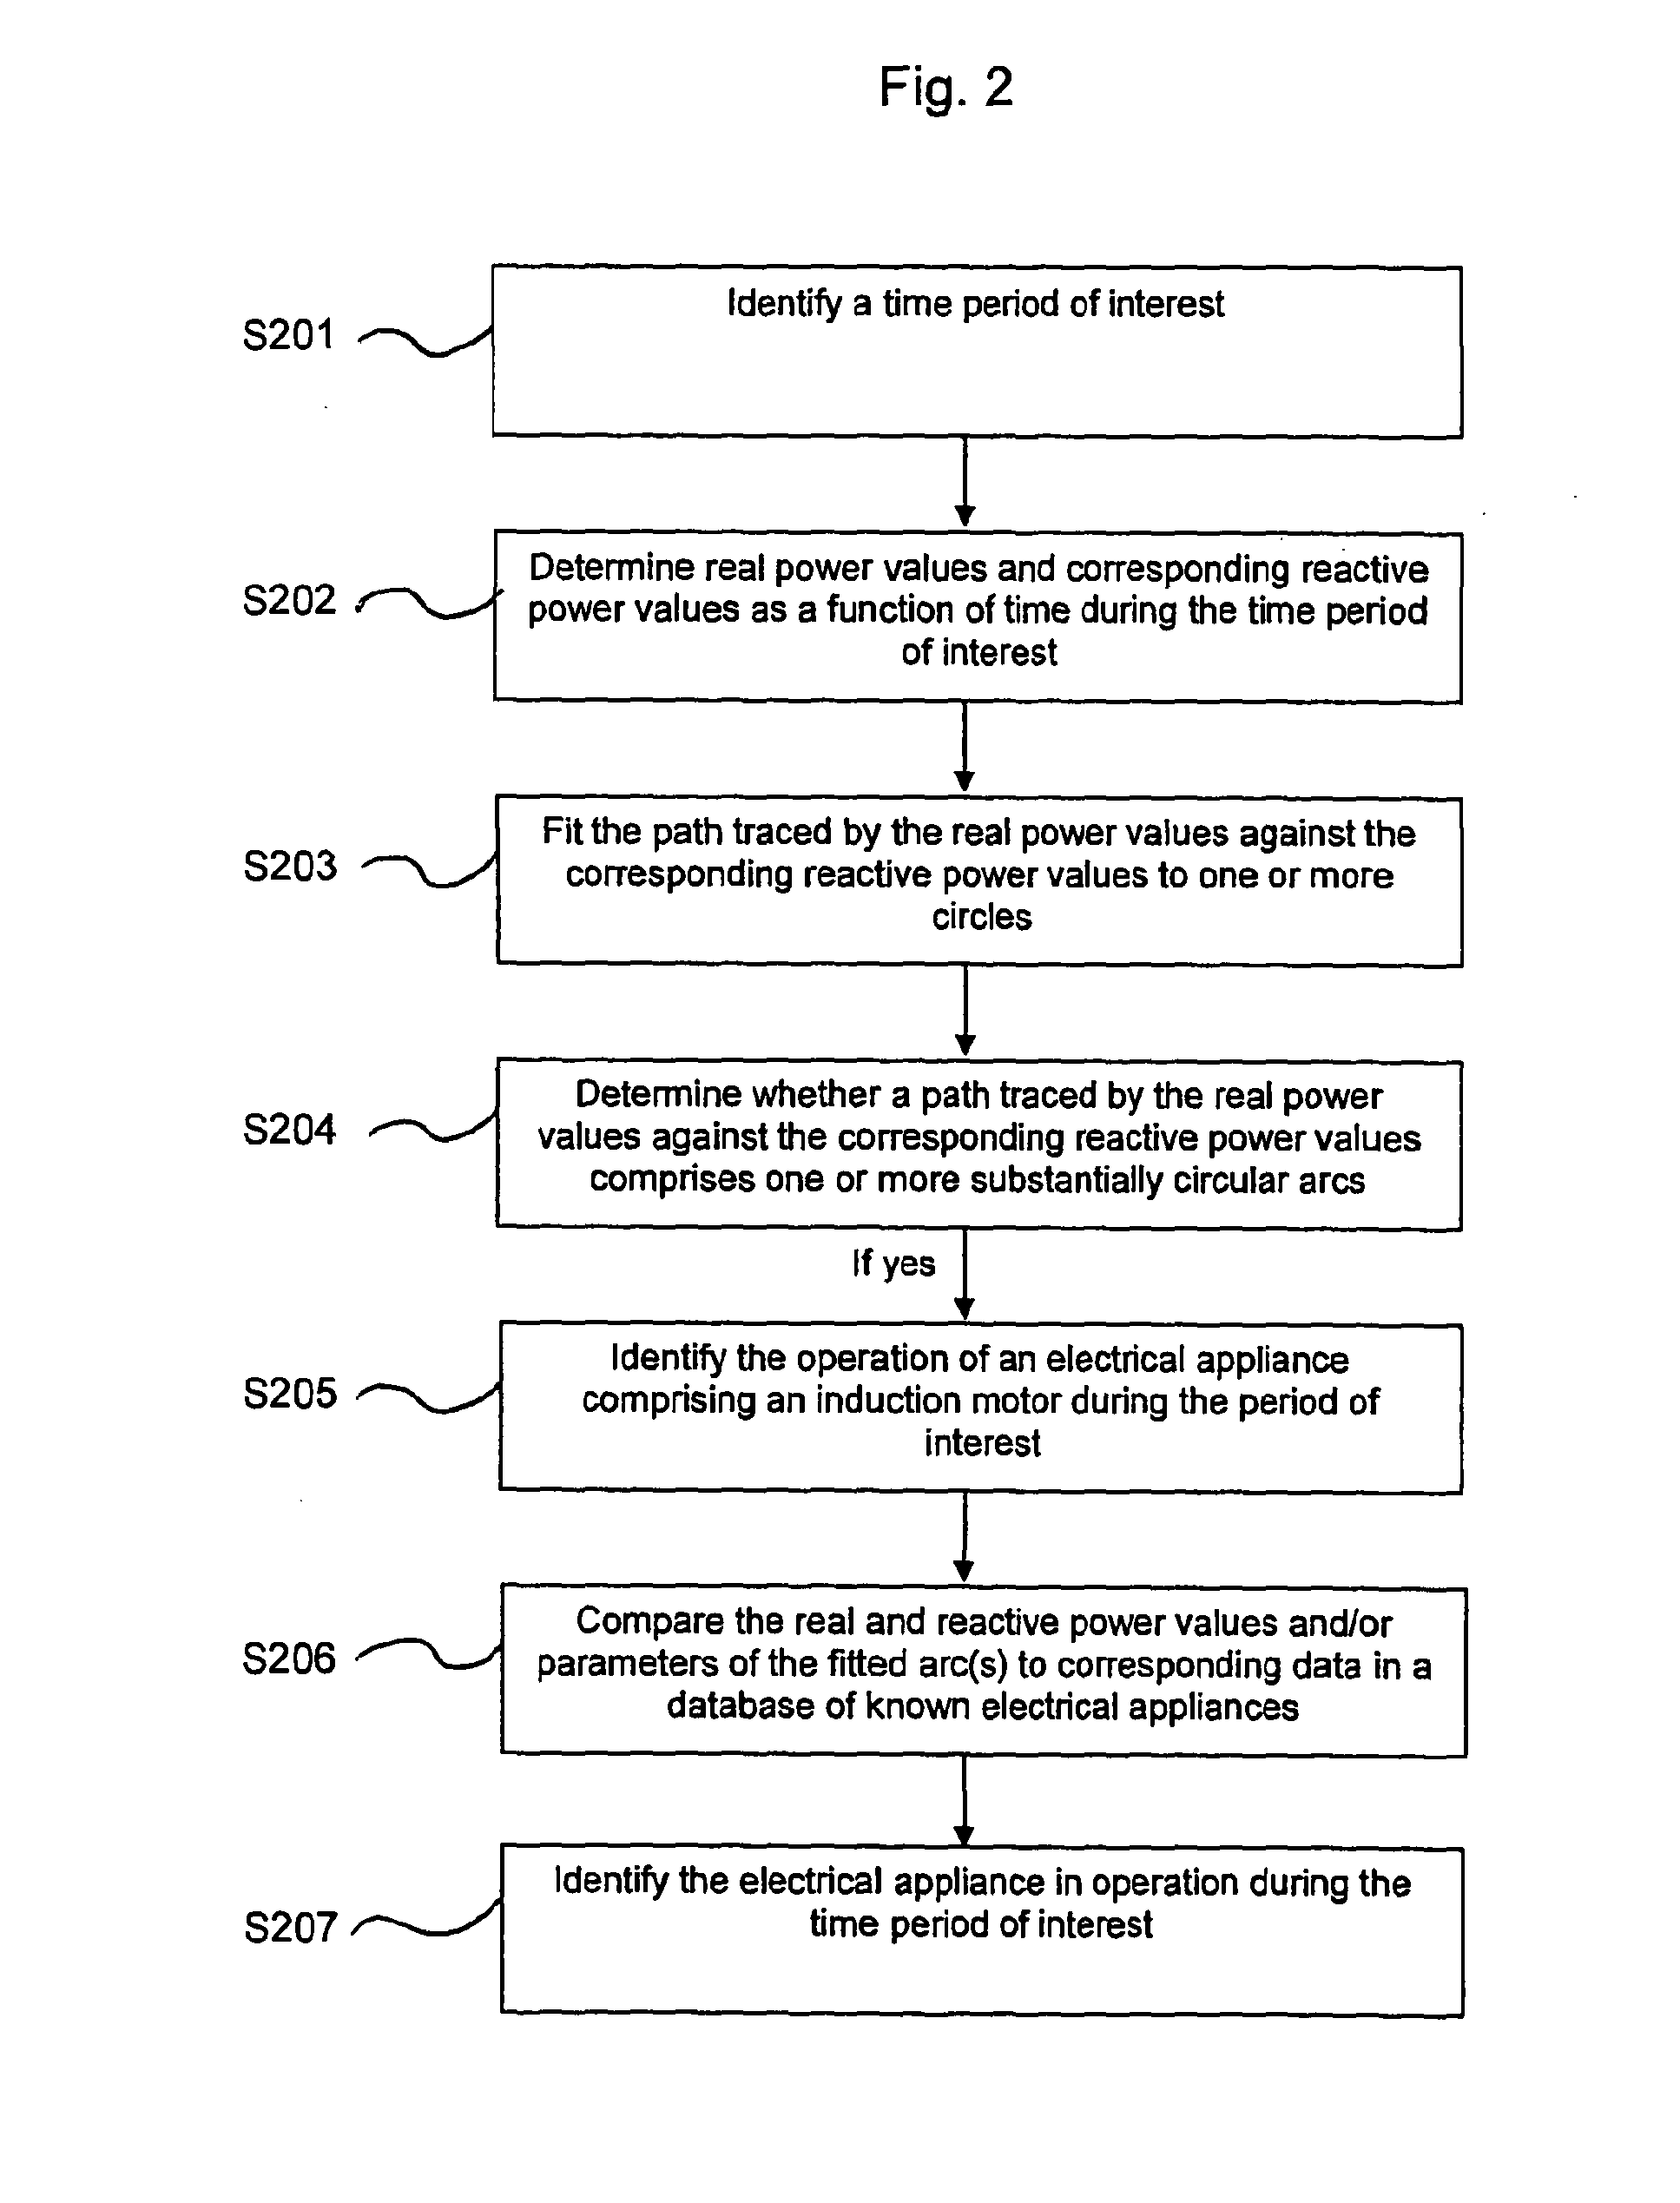 Identifying the operation of a specified type of appliance